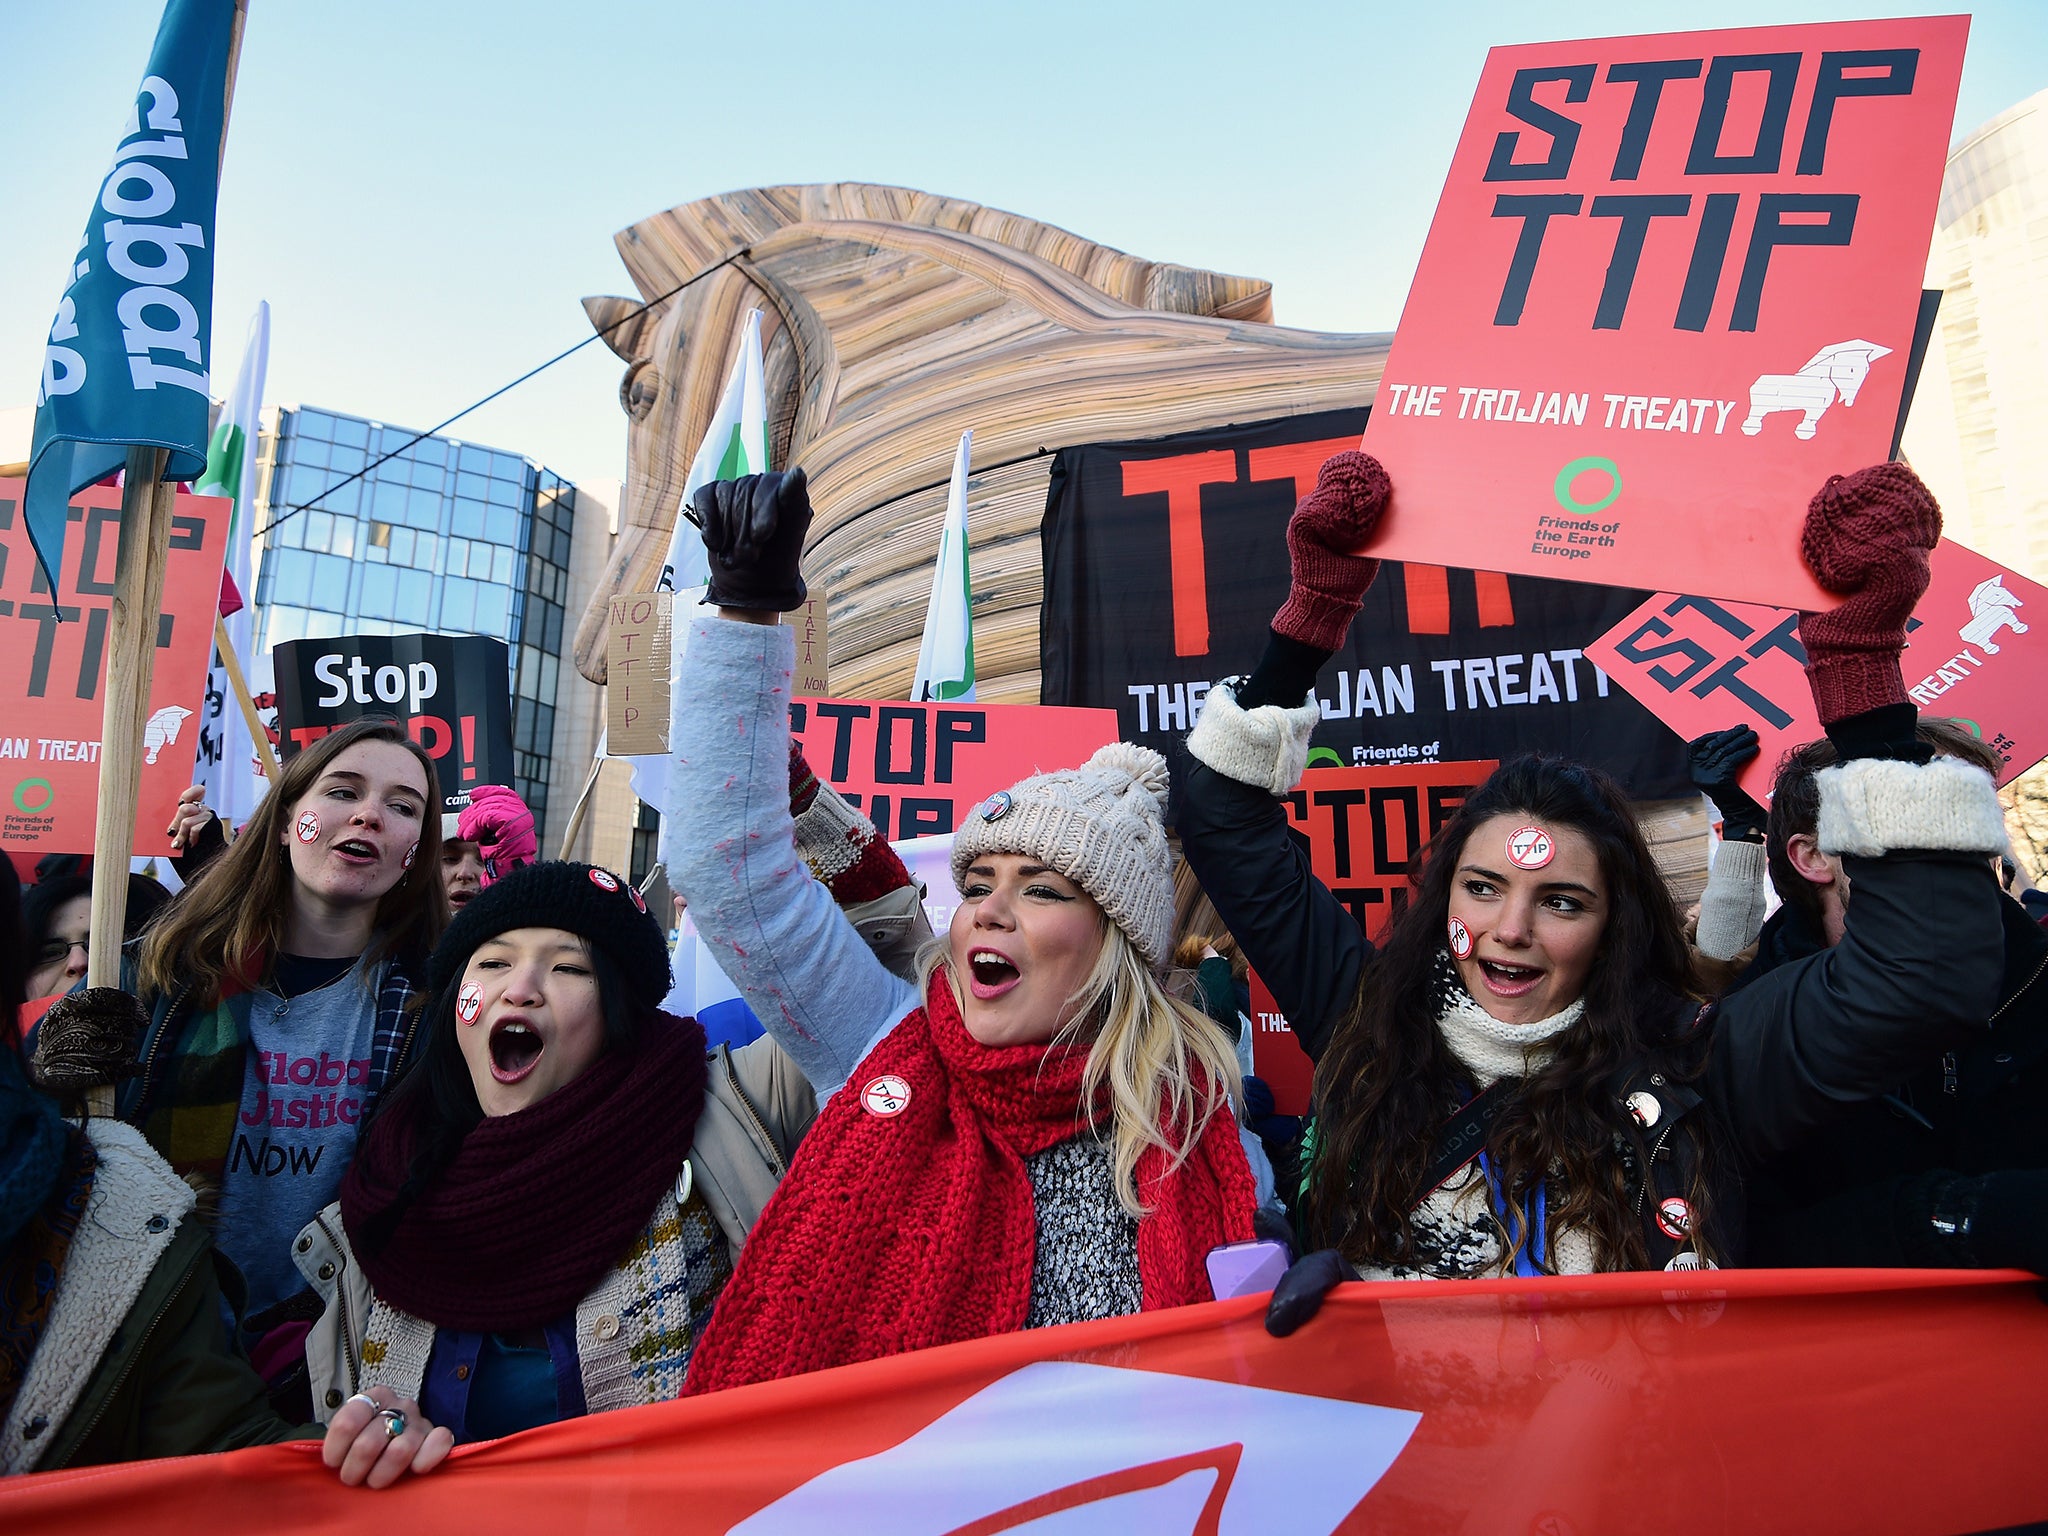 Demonstrators staging a protest against the Transatlantic Trade and Investment Pact (TTIP) in front of the the European institutions in Brussels in February (Getty)